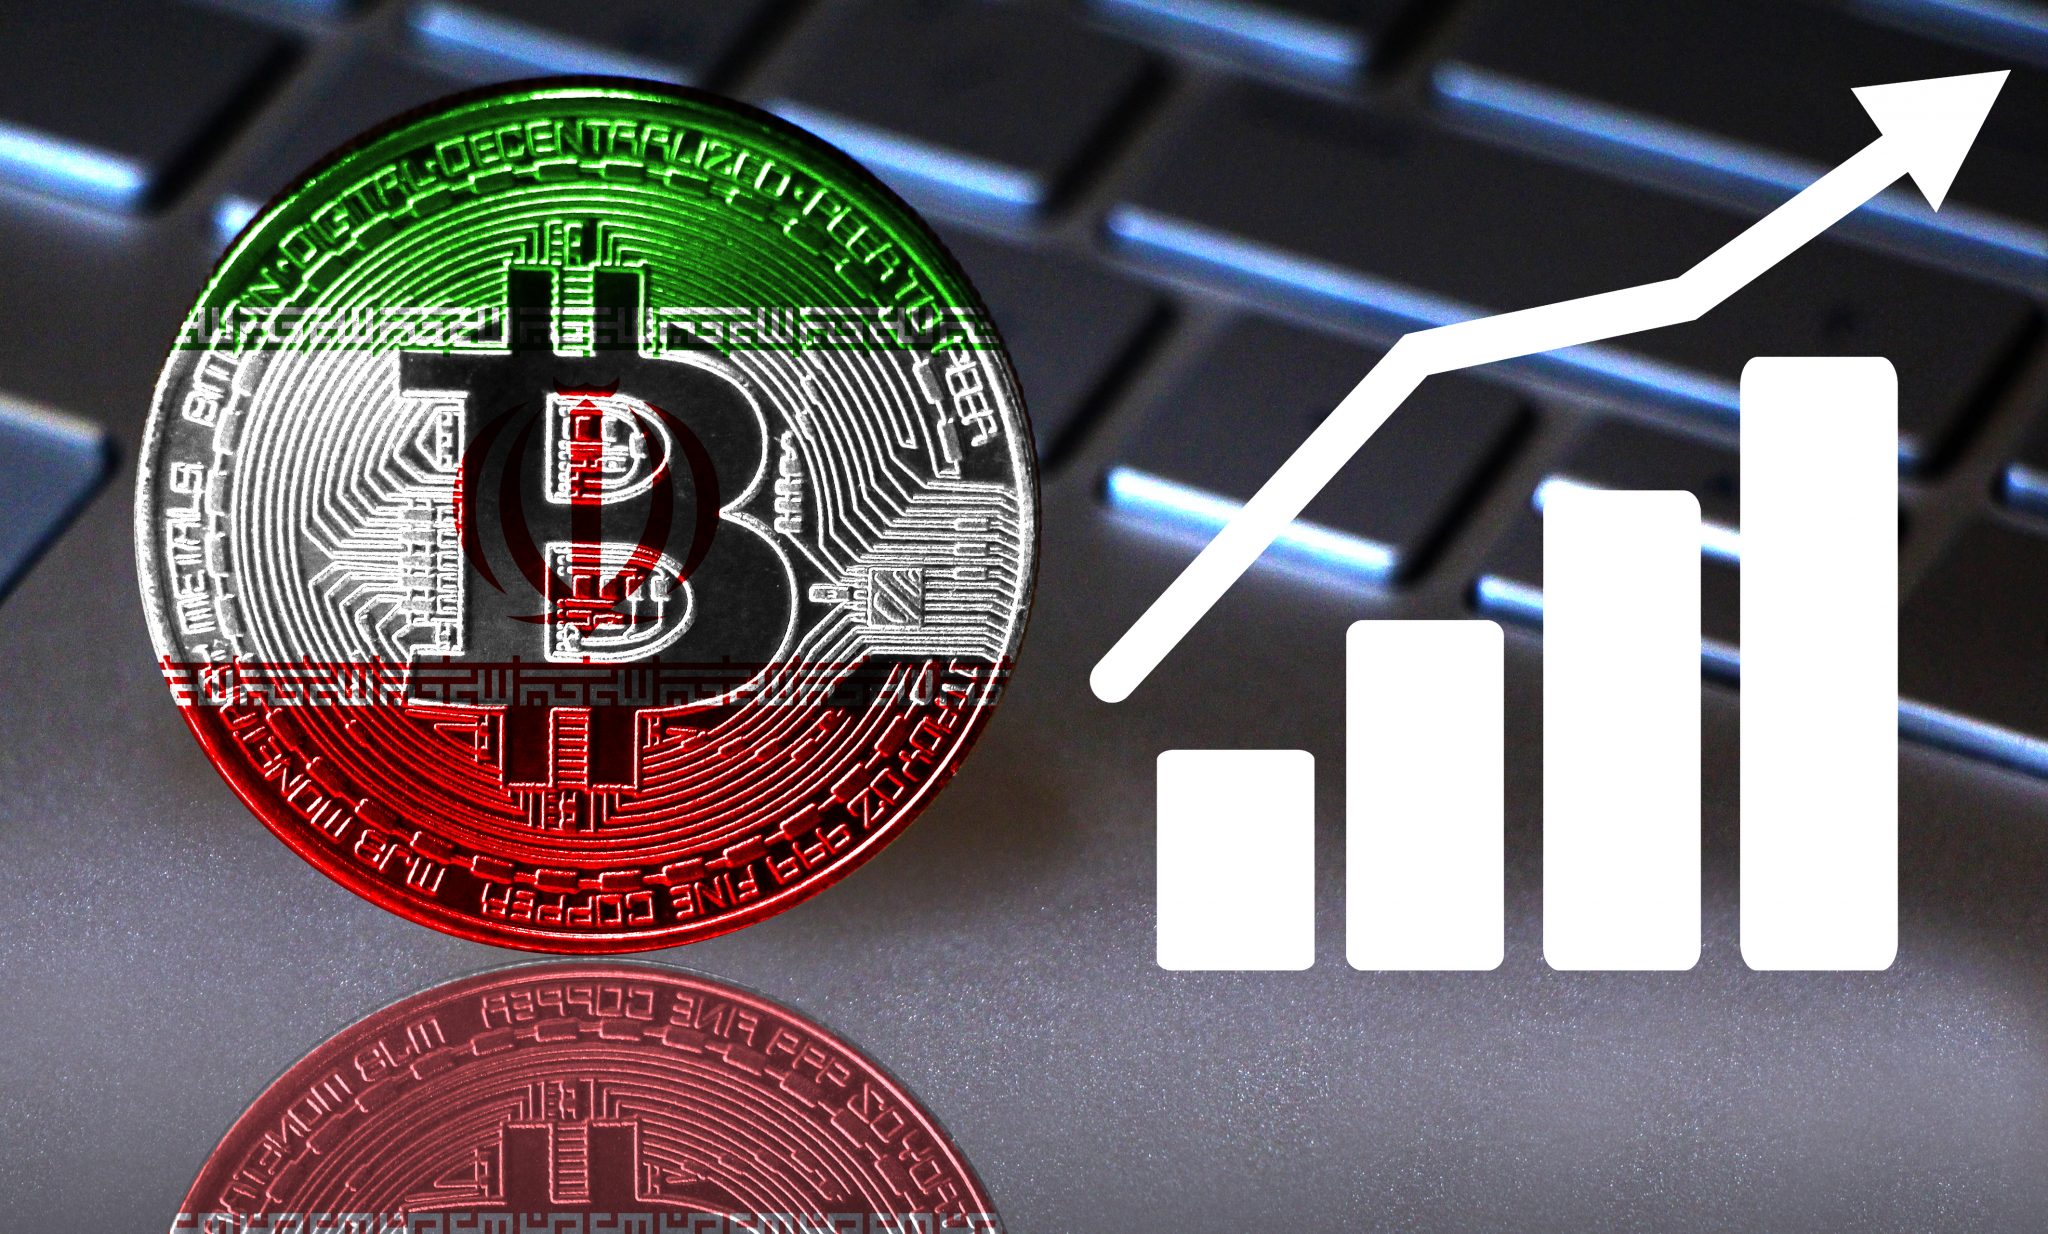 Bitcoin close-up on the keyboard background, the Iran flag is shown on the bitcoin. Also the growth chart is shown.